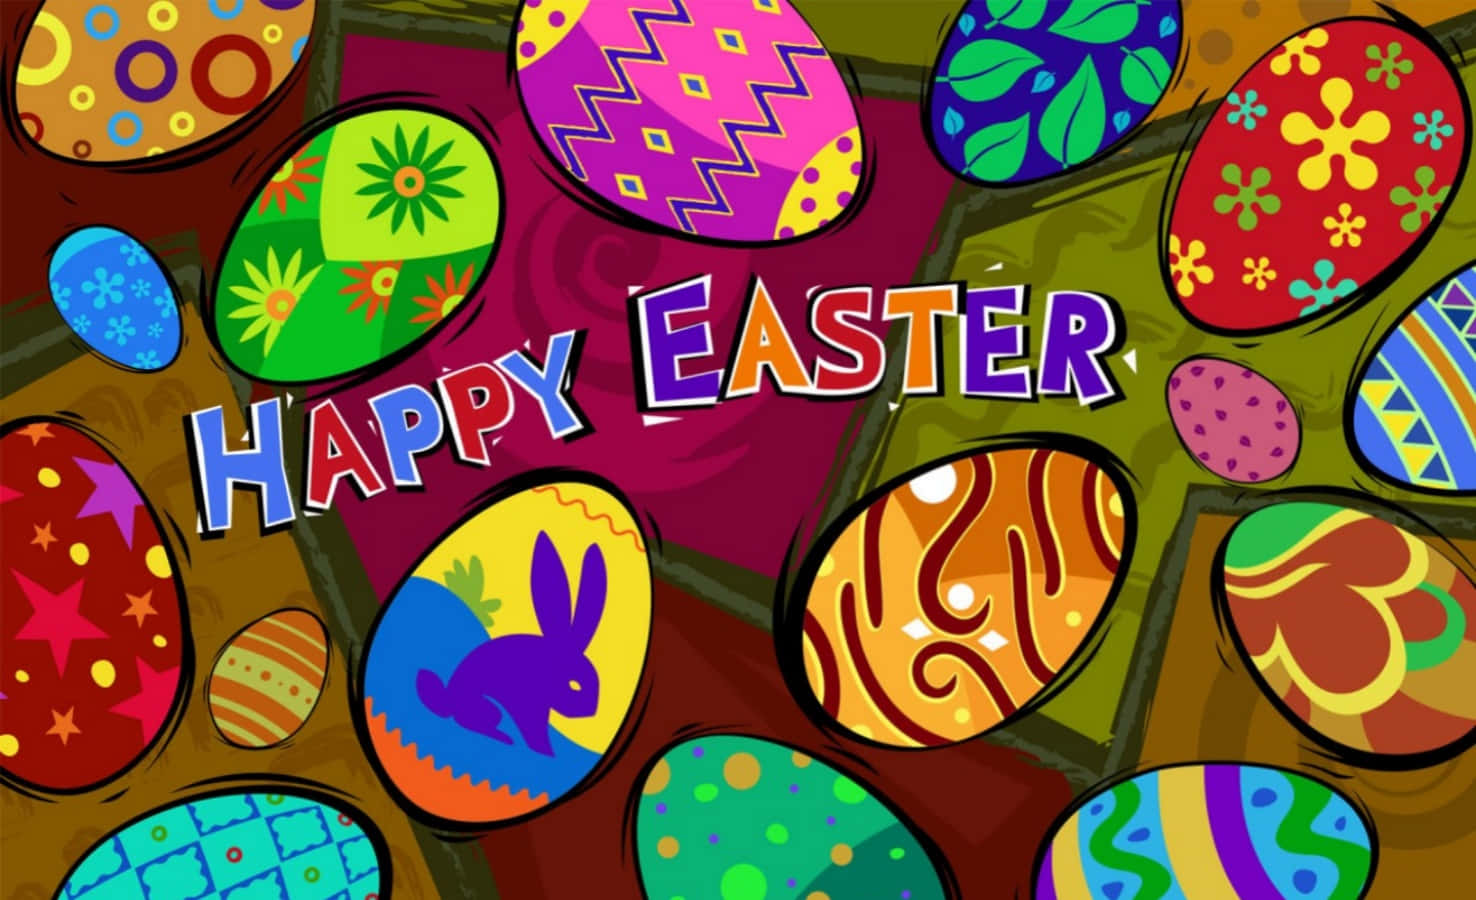 Wishing you a bright and Happy Easter!